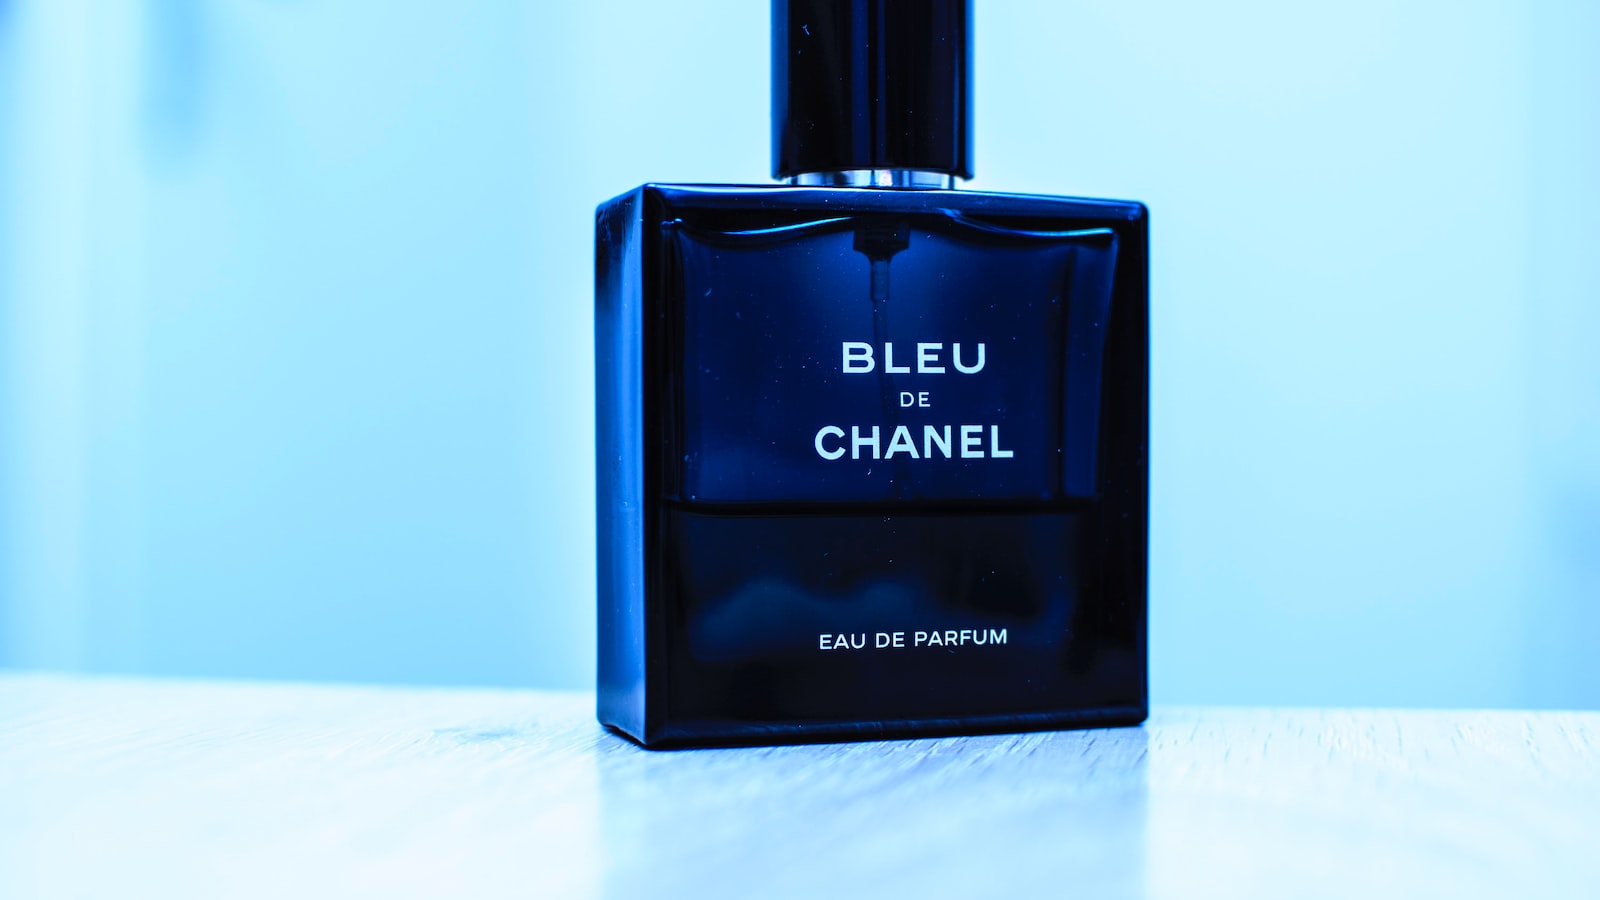 Captivating Allure: Our Top Recommendations for Luxurious and Prestigious Perfume Brands